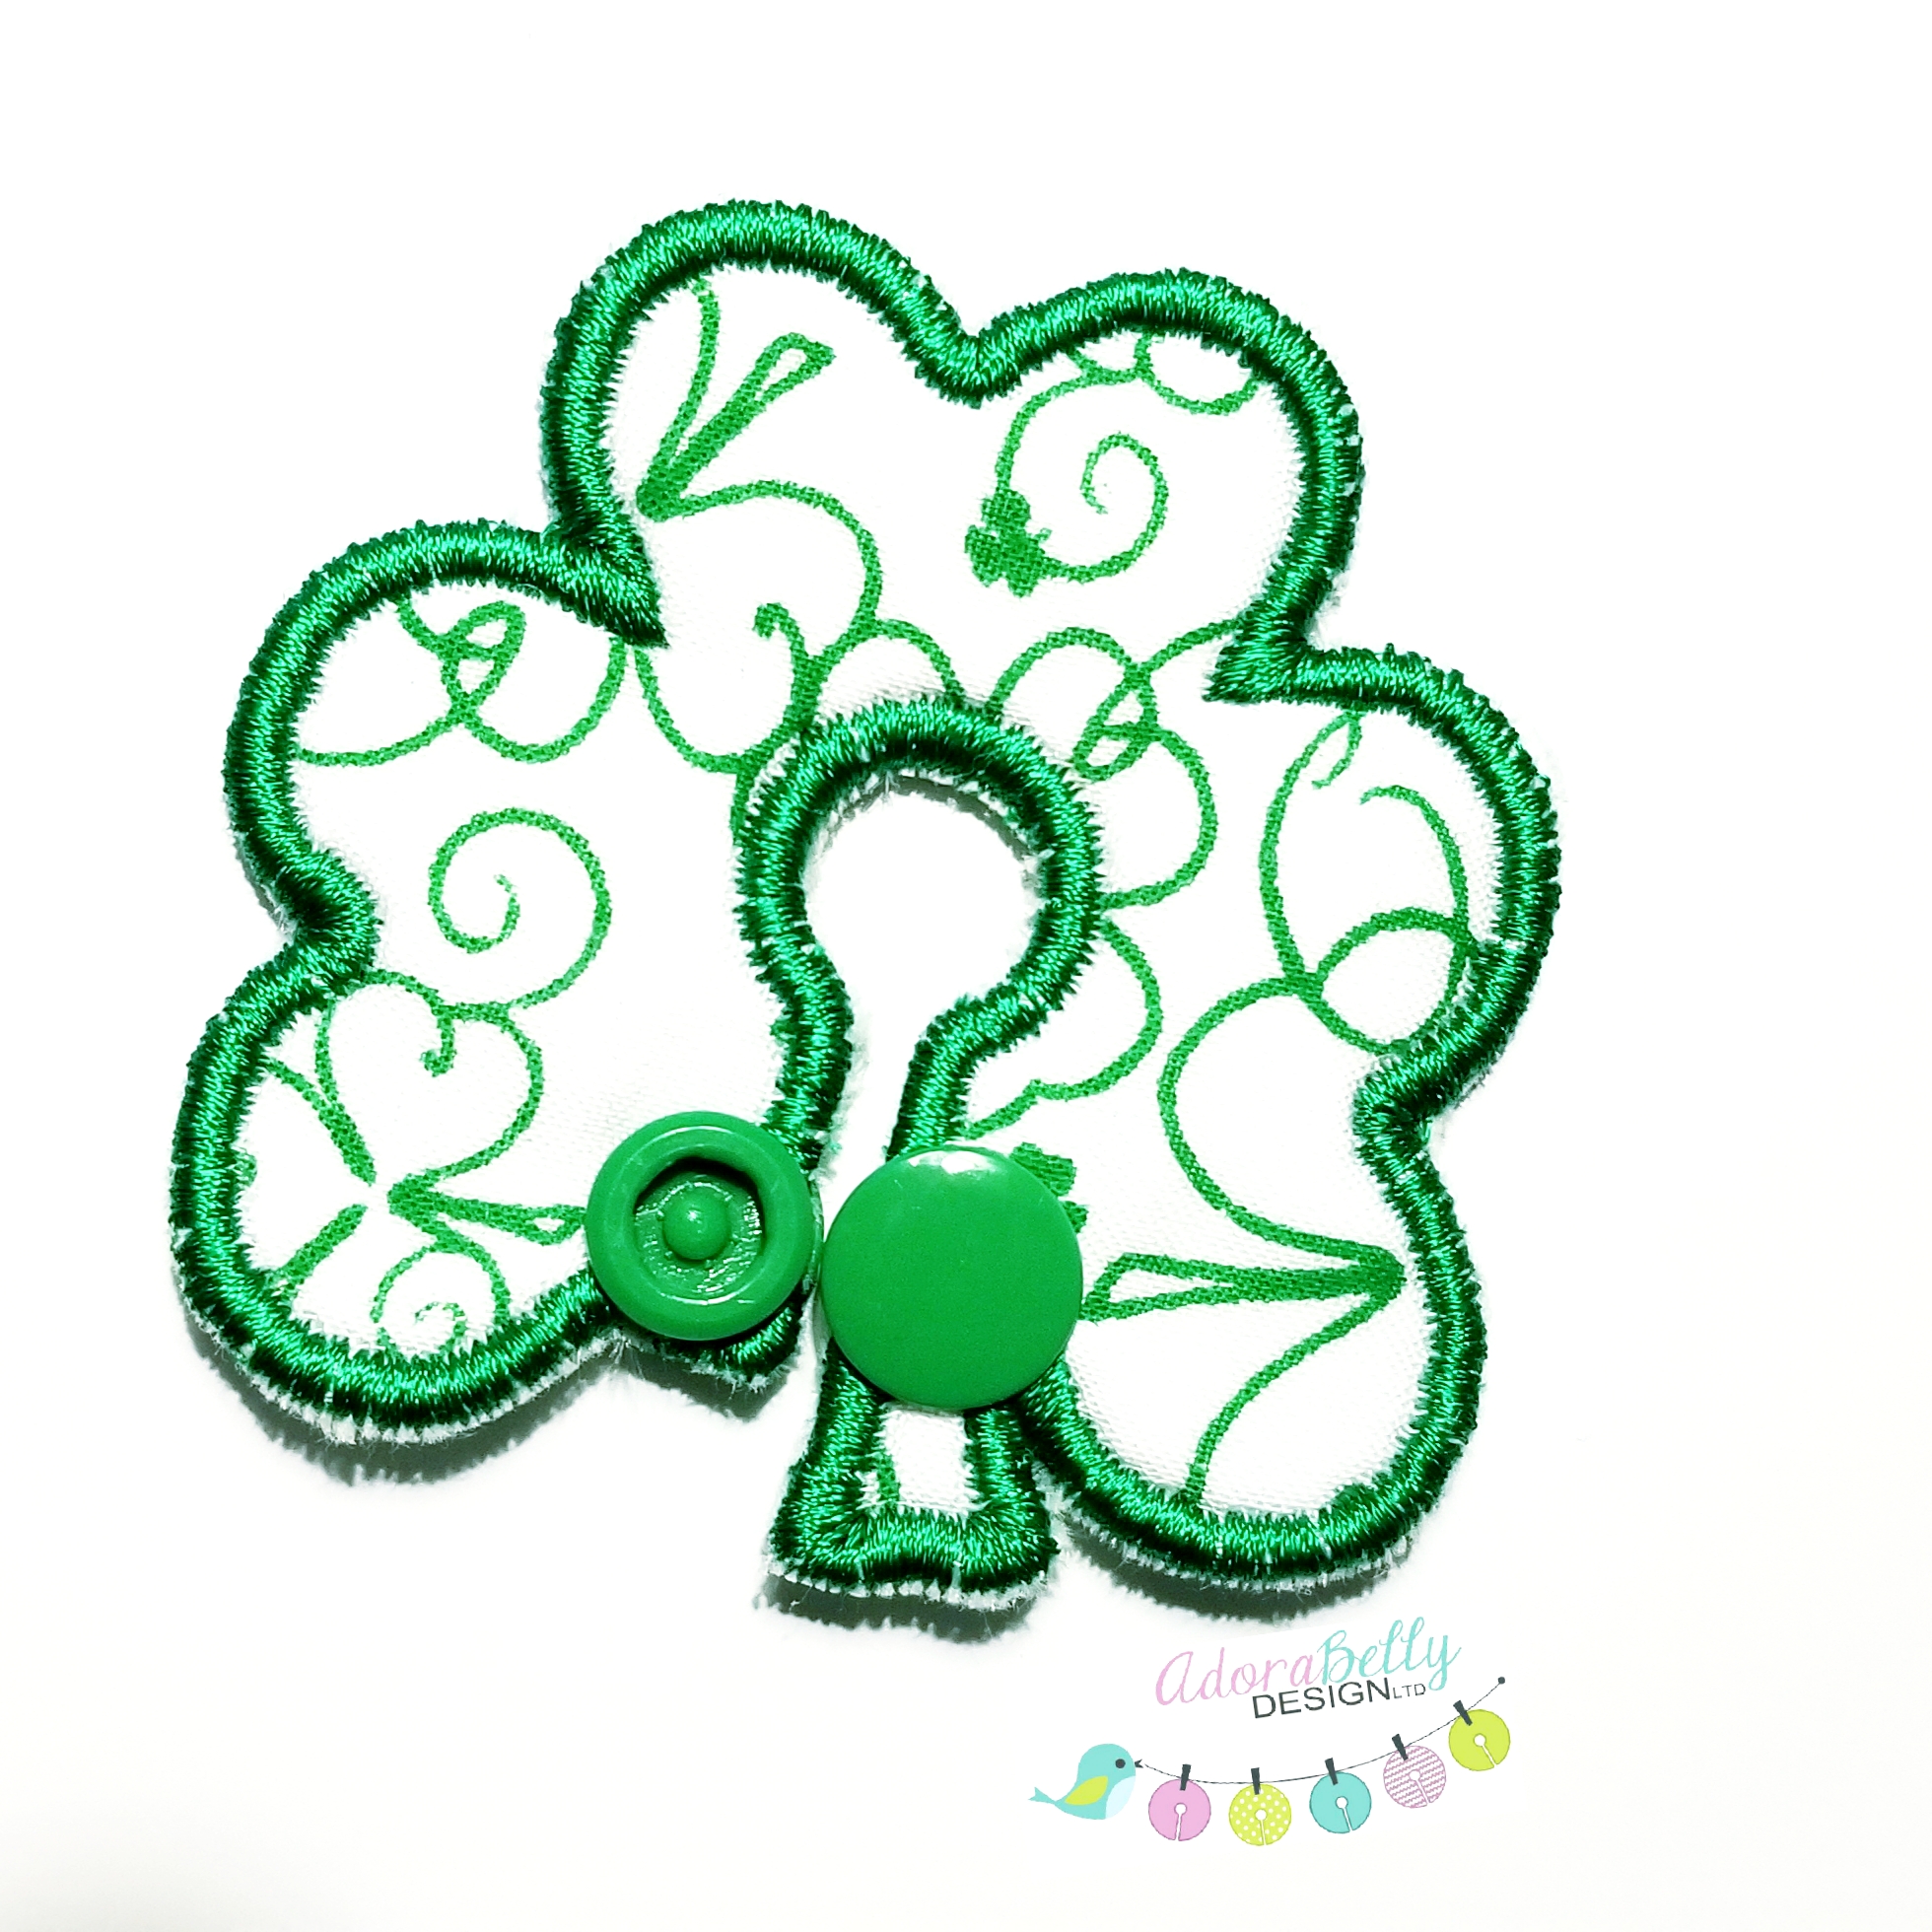 Feeding / G-Tube Cover Shaped Like Shamrock, White with Green Pattern and Accents